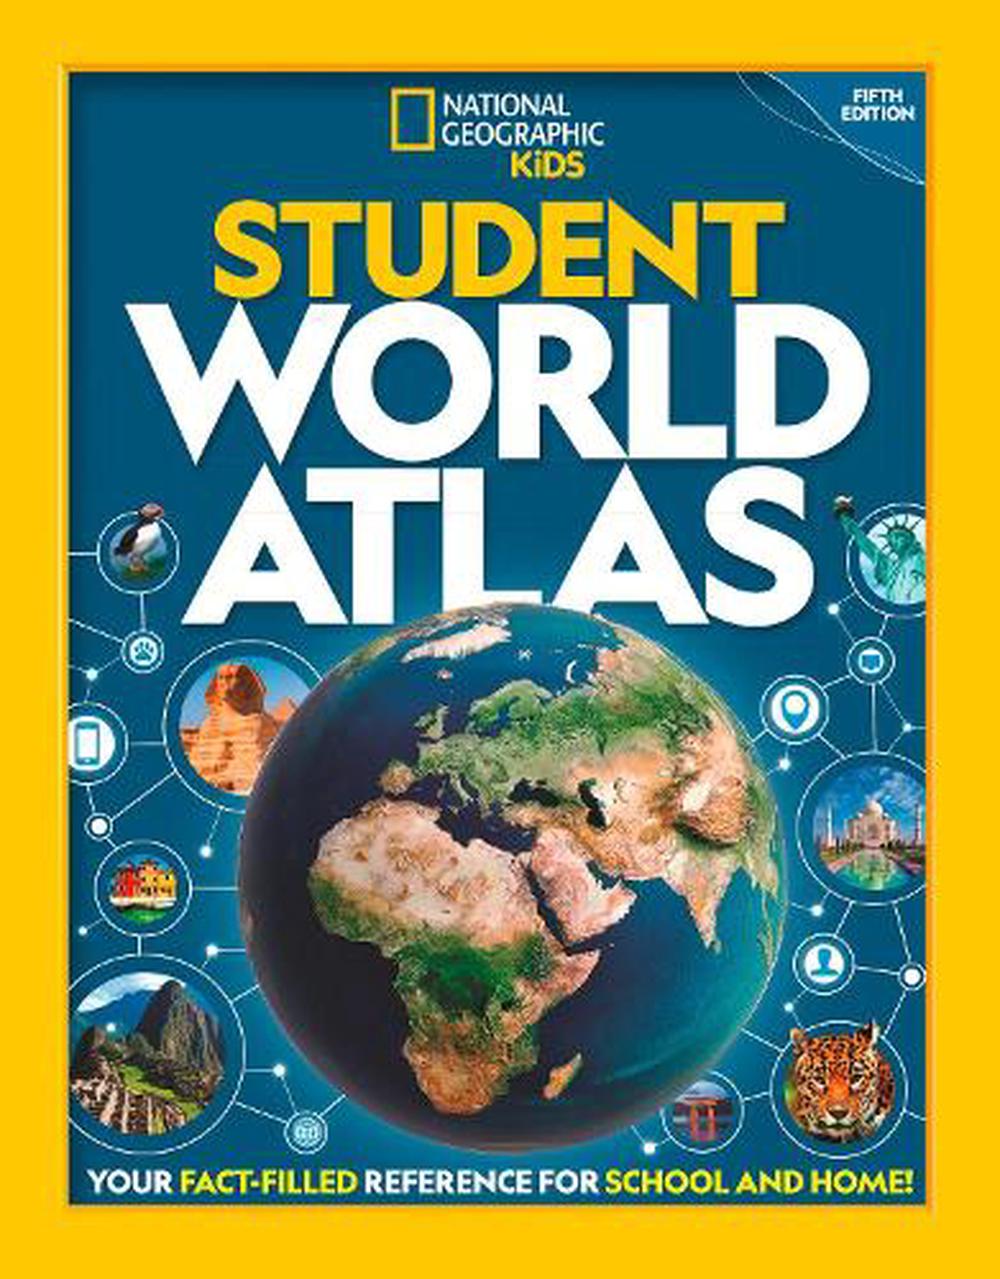 National Geographic Student World Atlas by National Geographic Kids,  Hardcover, 9781426334801 | Buy online at The Nile